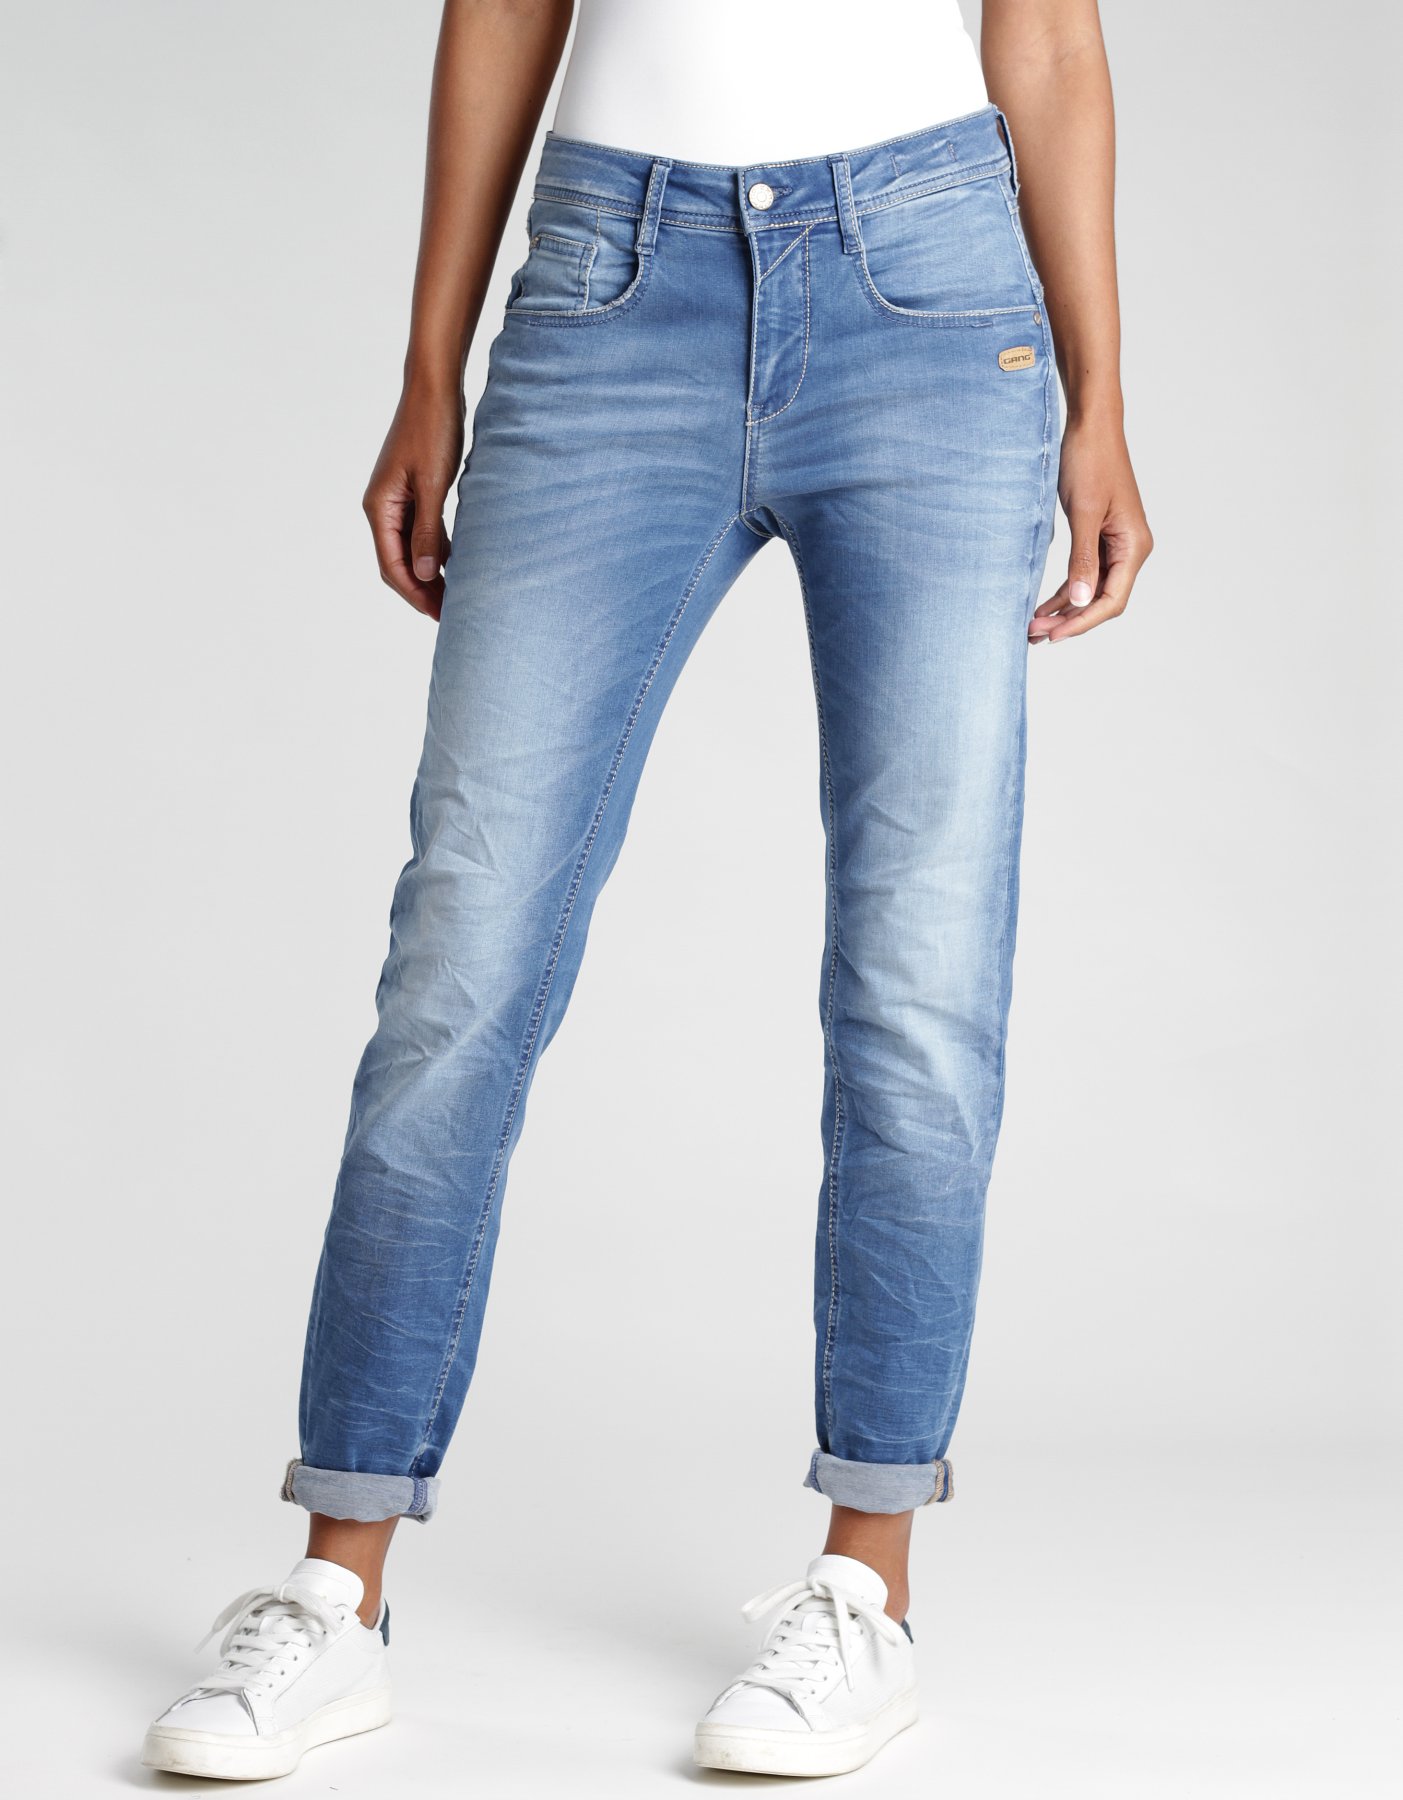 | Jeans FIT Engelheym TRULY | GANG VINTAGE CROPPED-RELAXED DOWN Hosen DAMEN 94AMELIE | JEANS